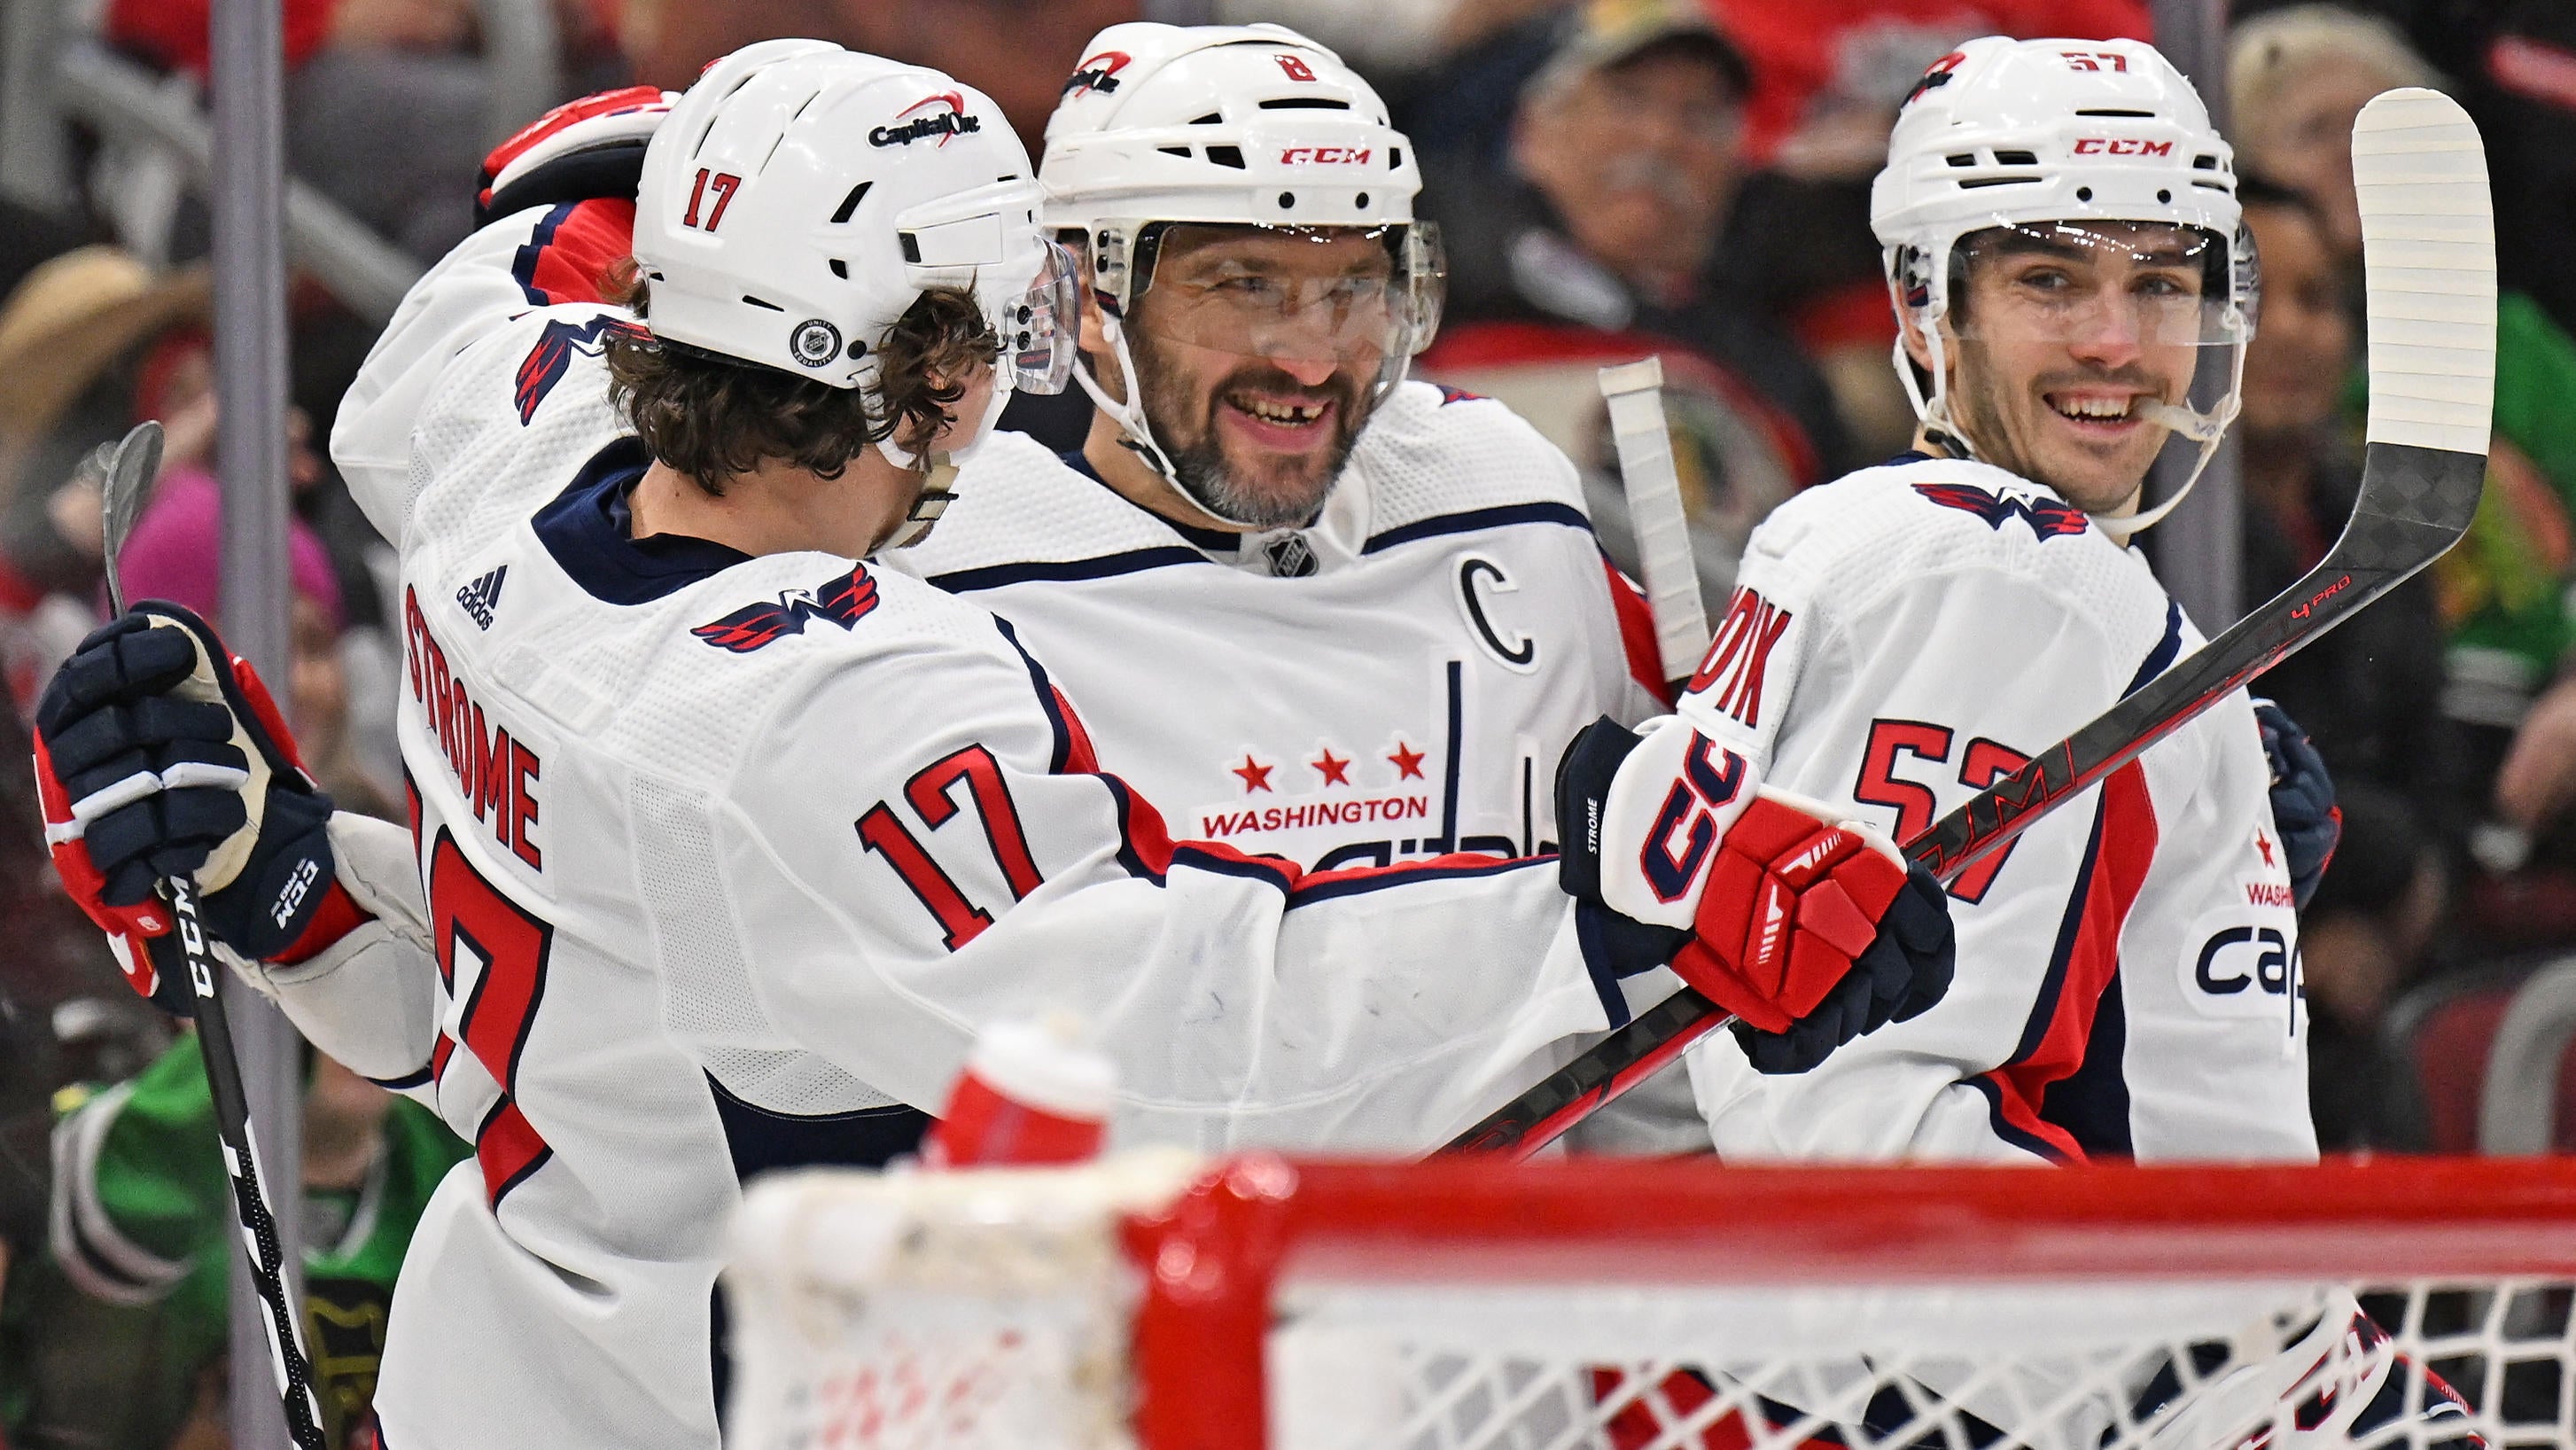 Alex Ovechkin scores 800th career goal in hat trick vs. Chicago; joins Wayne Gretzky, Gordie Howe in 800 club